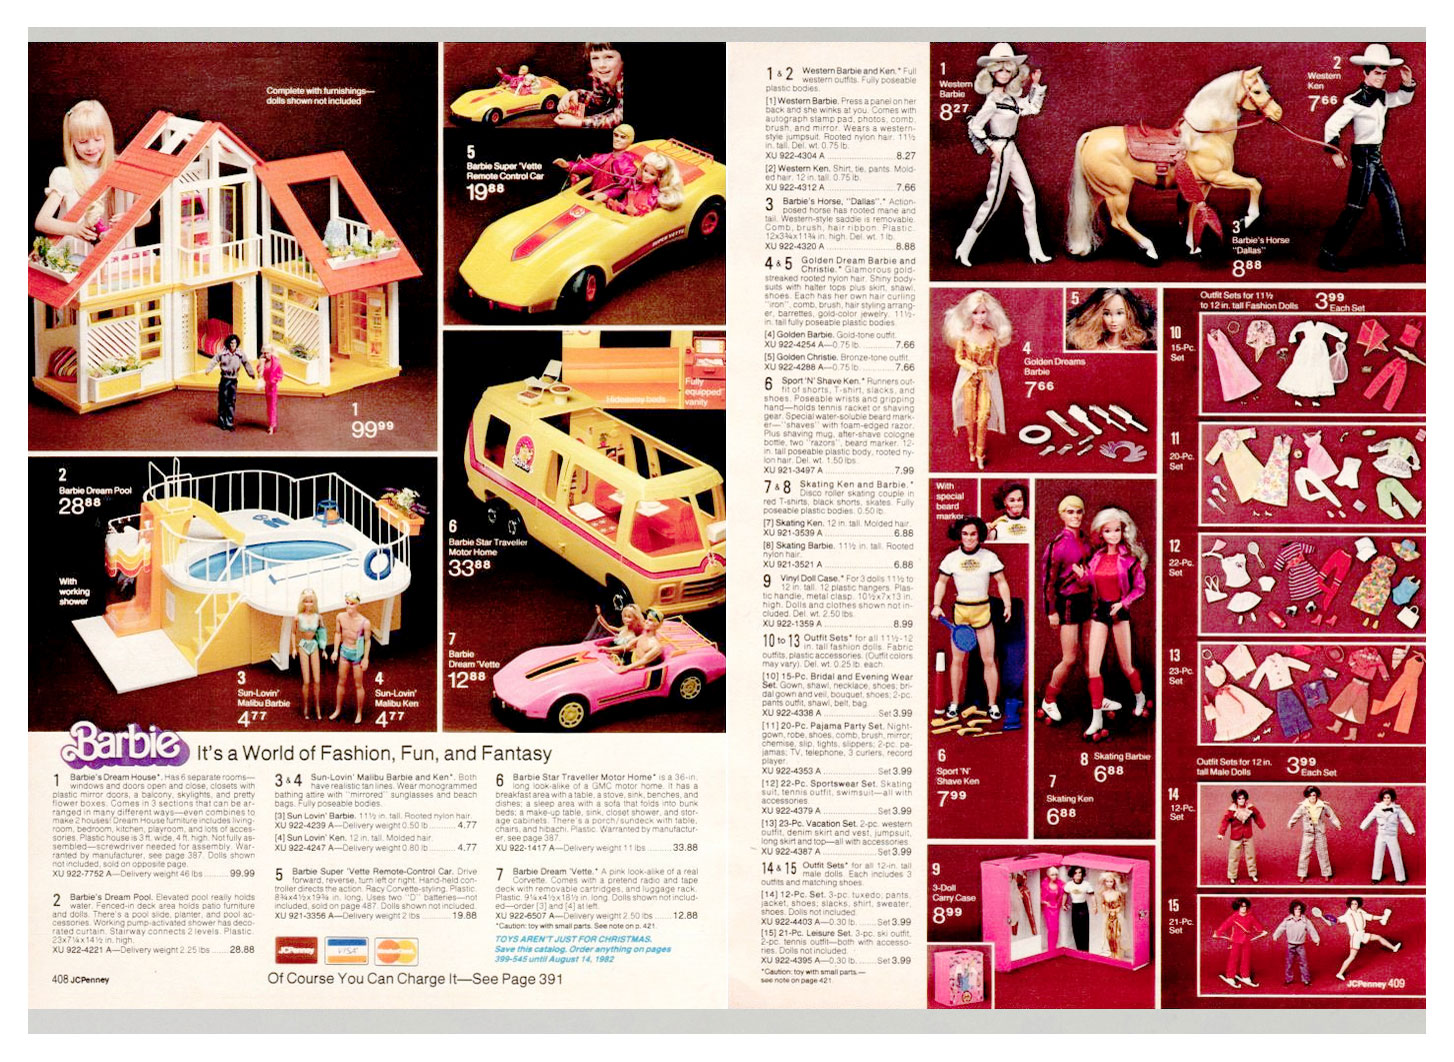 From 1981 JCPenney Christmas catalogue